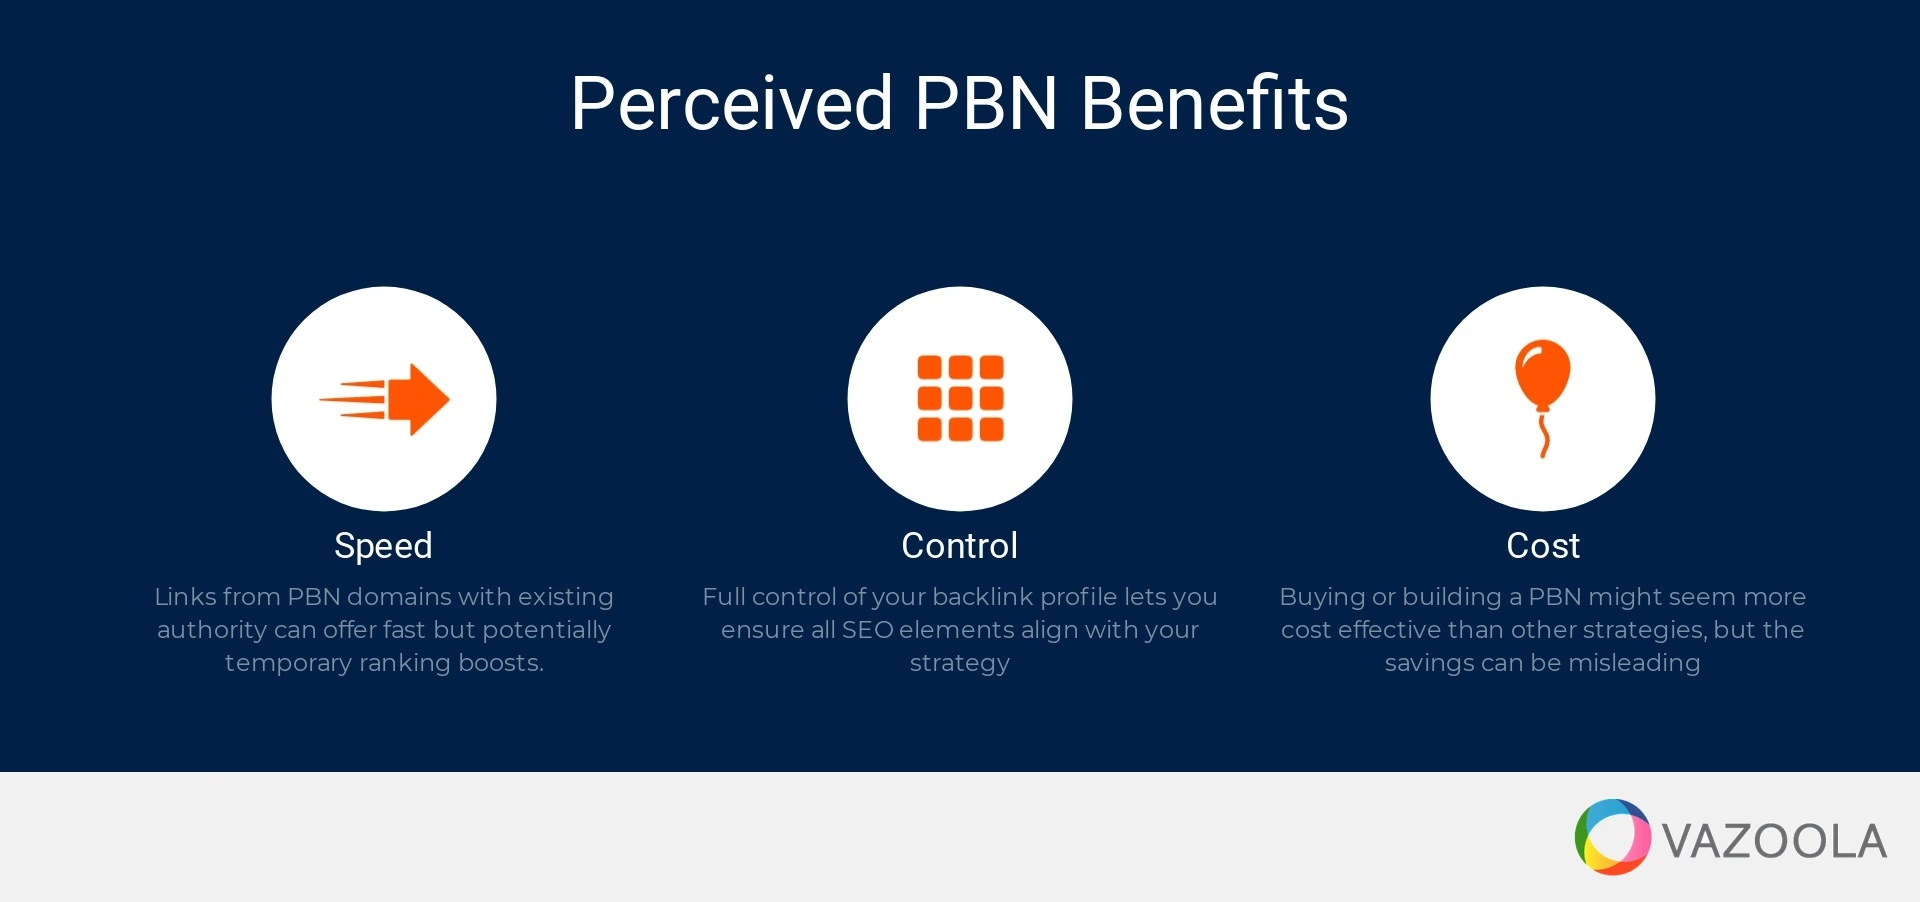 Perceived benefits of PBNs - Speed, Cost, Control